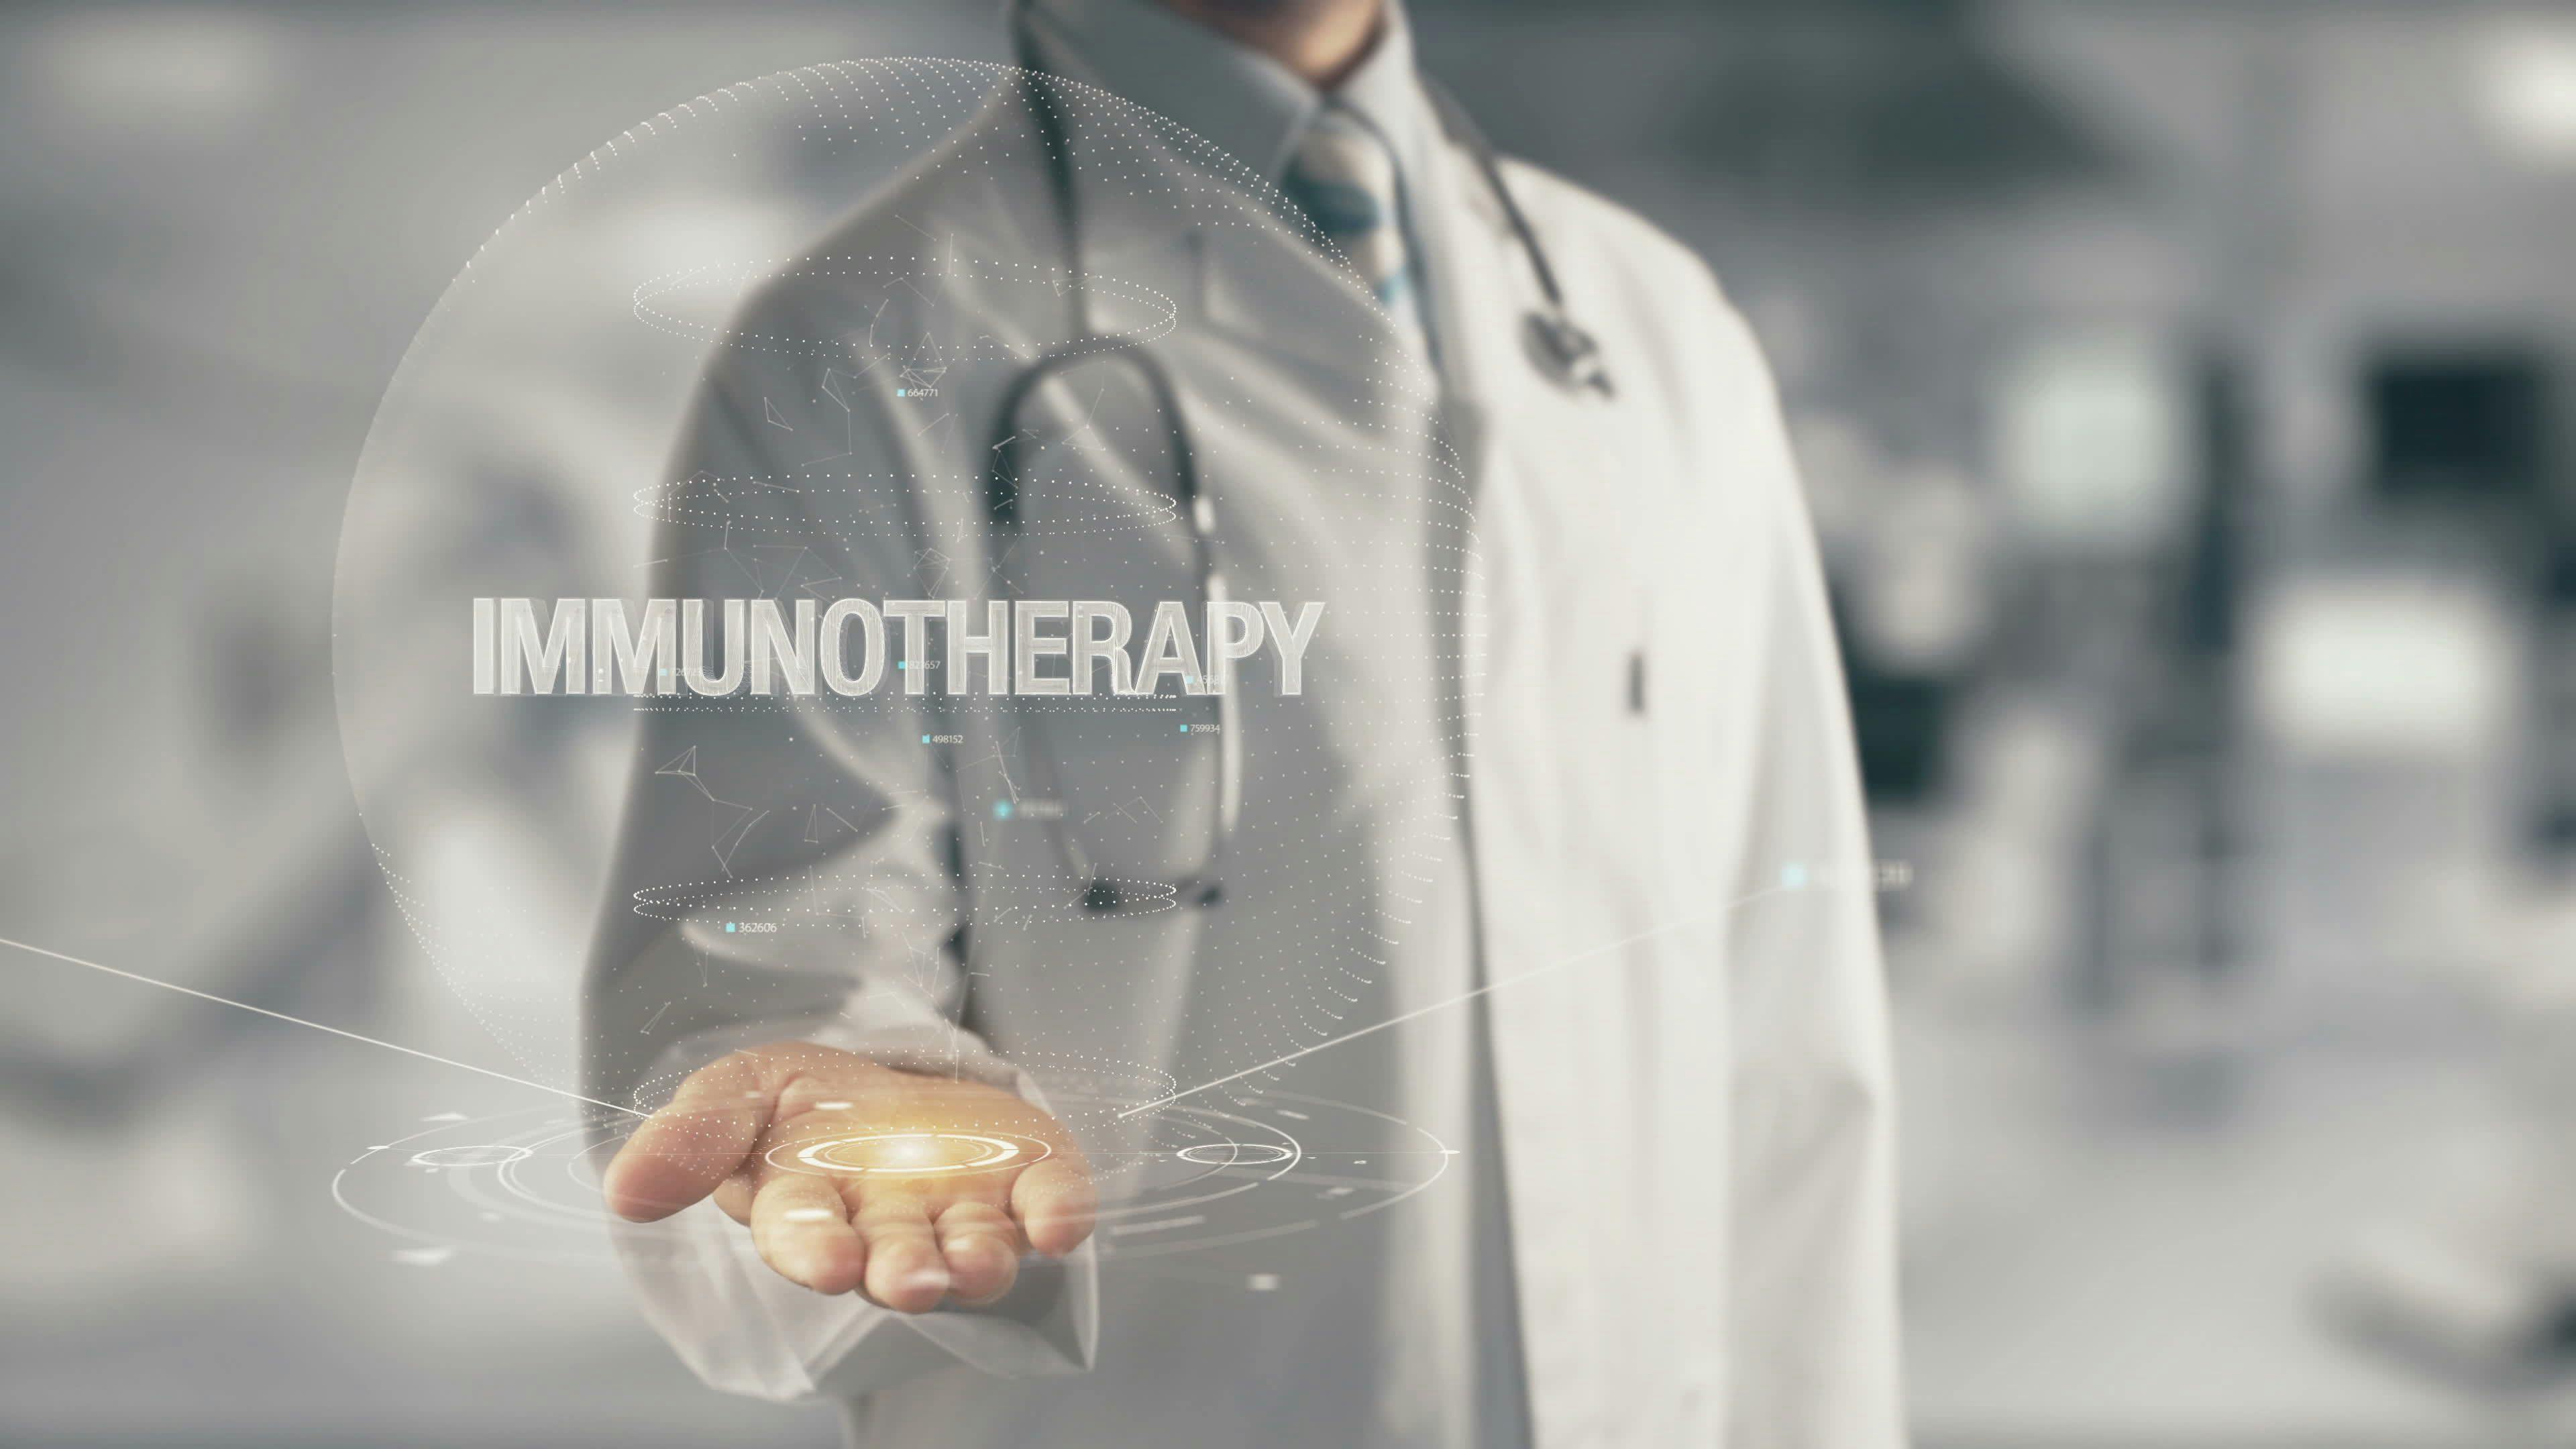 Doctor in white coat with immunothearpy word 